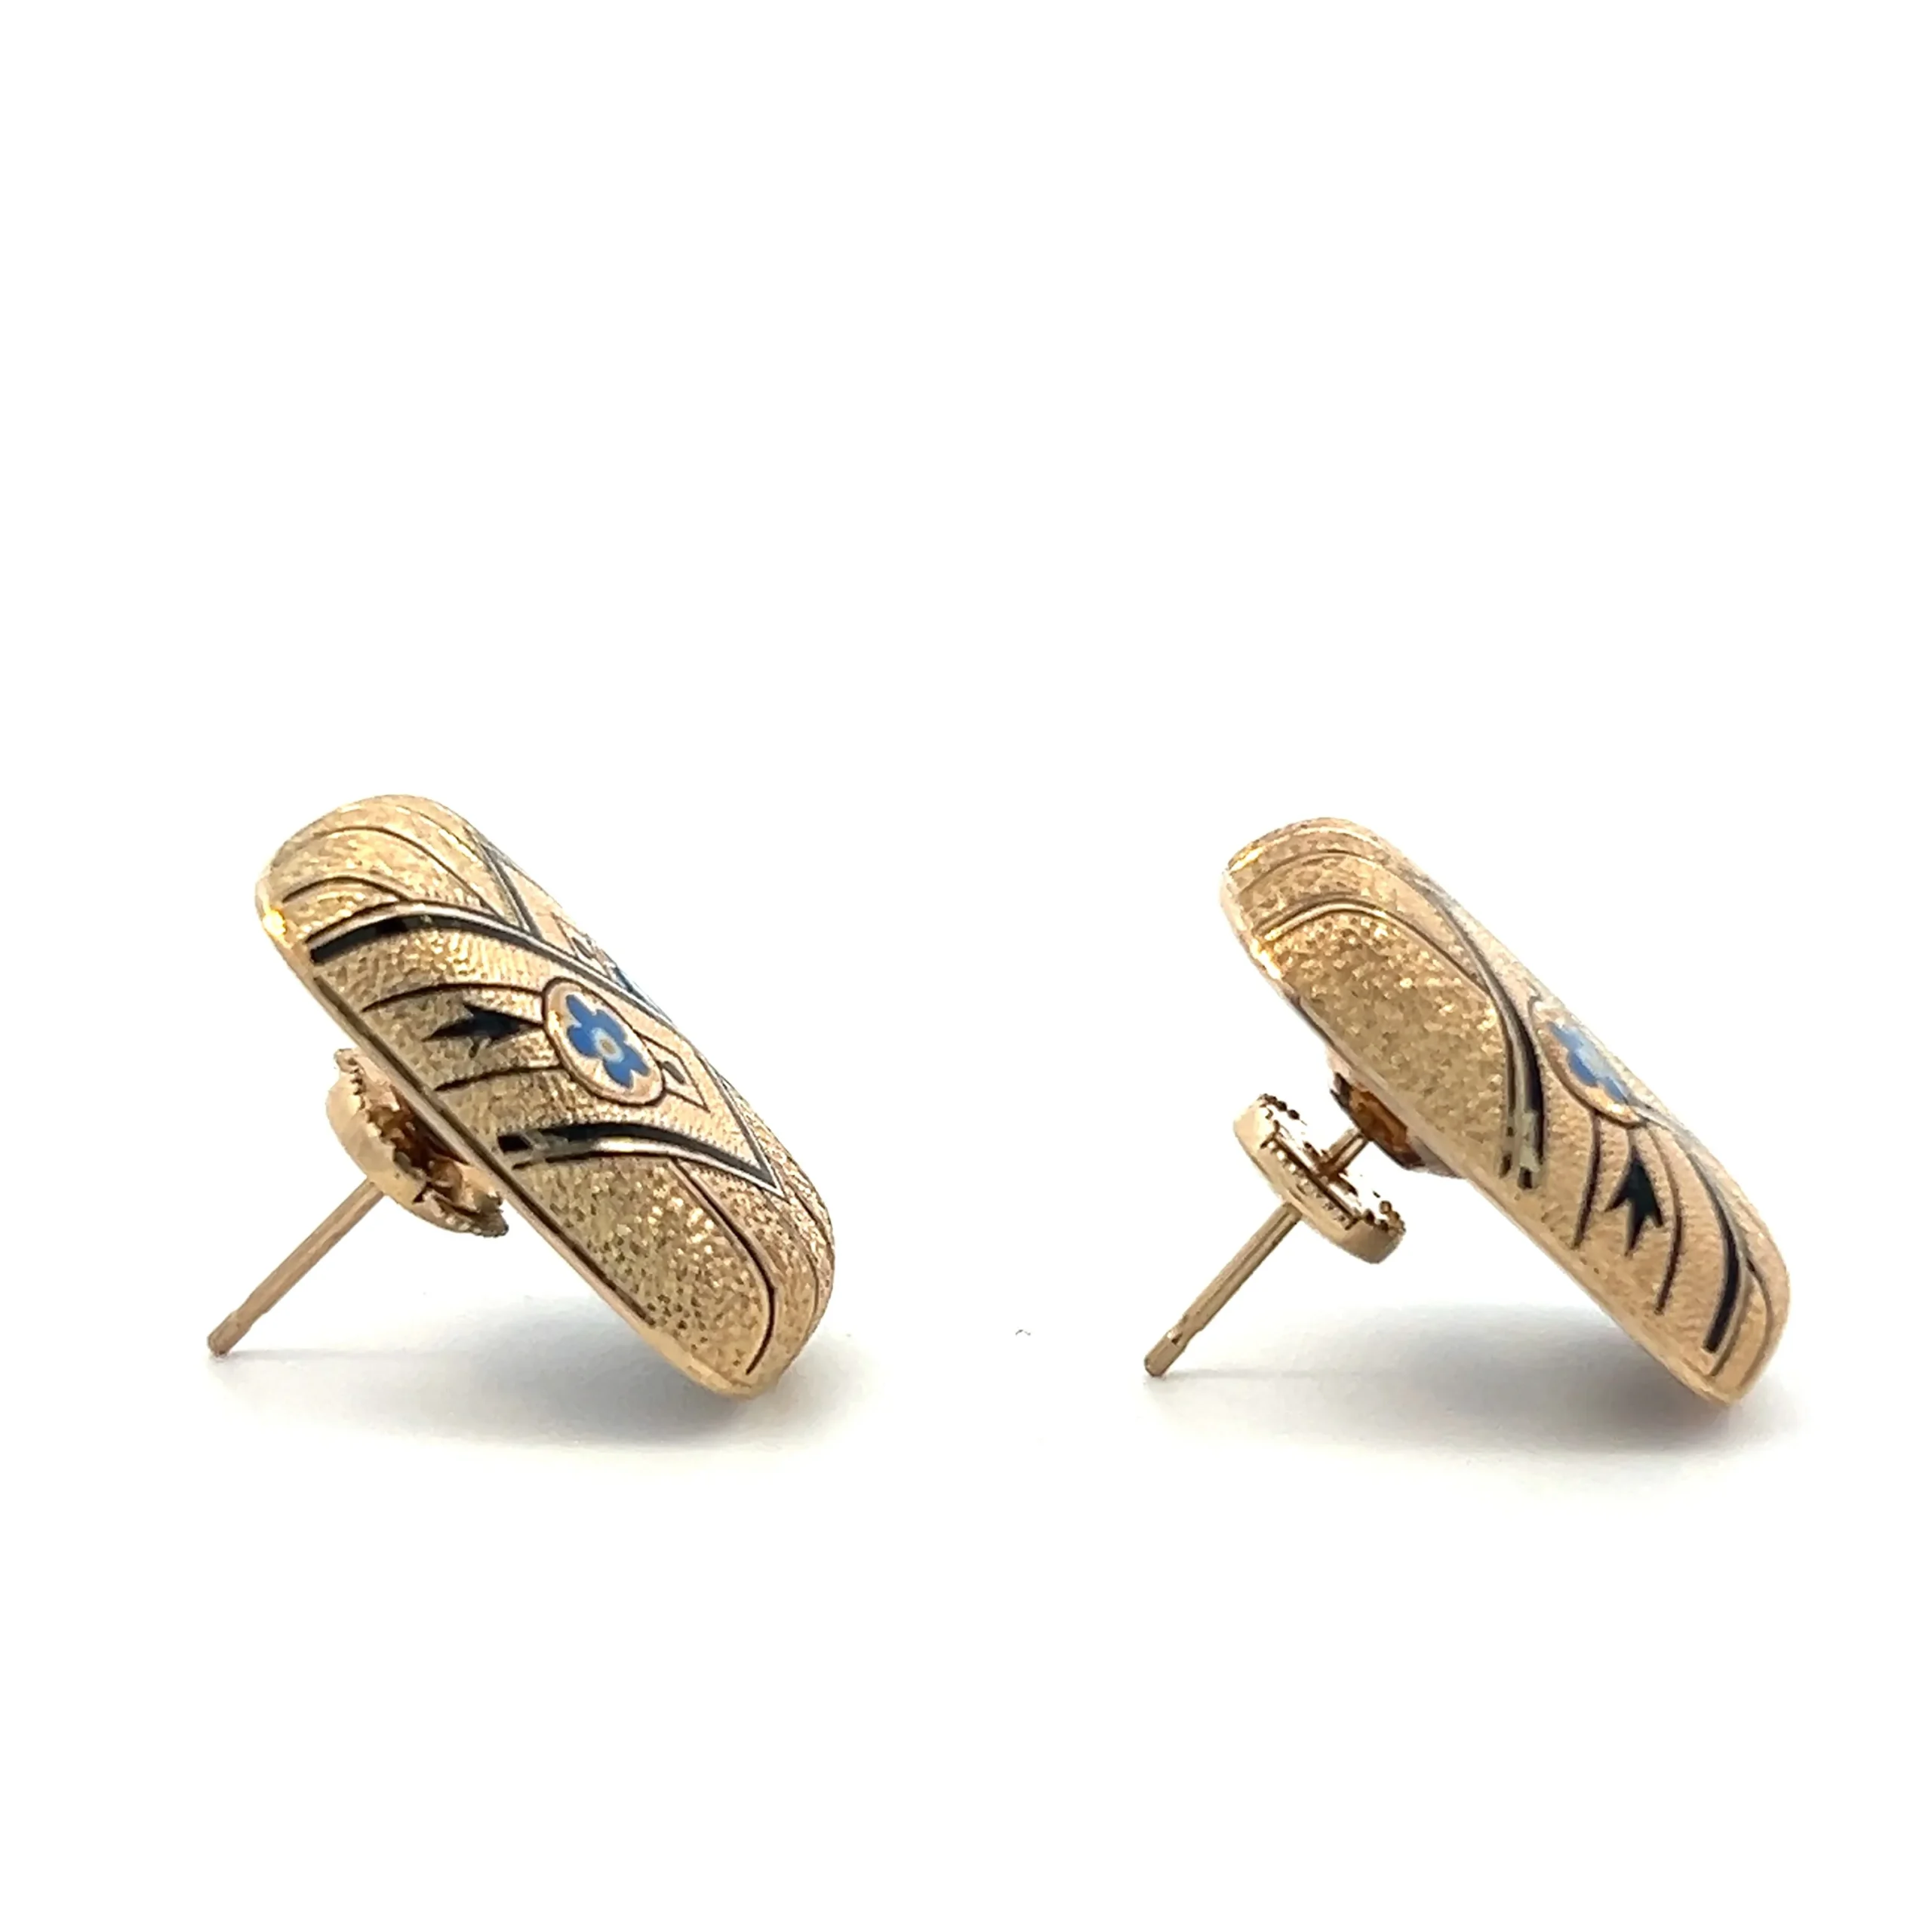 One pair of estate 14 karat yellow gold rectangle-shaped stud earrings with enamel accents. There are geometrical motif black enamel accents and blue and white enamel floral accents. The earrings are vintage from the 1940s.